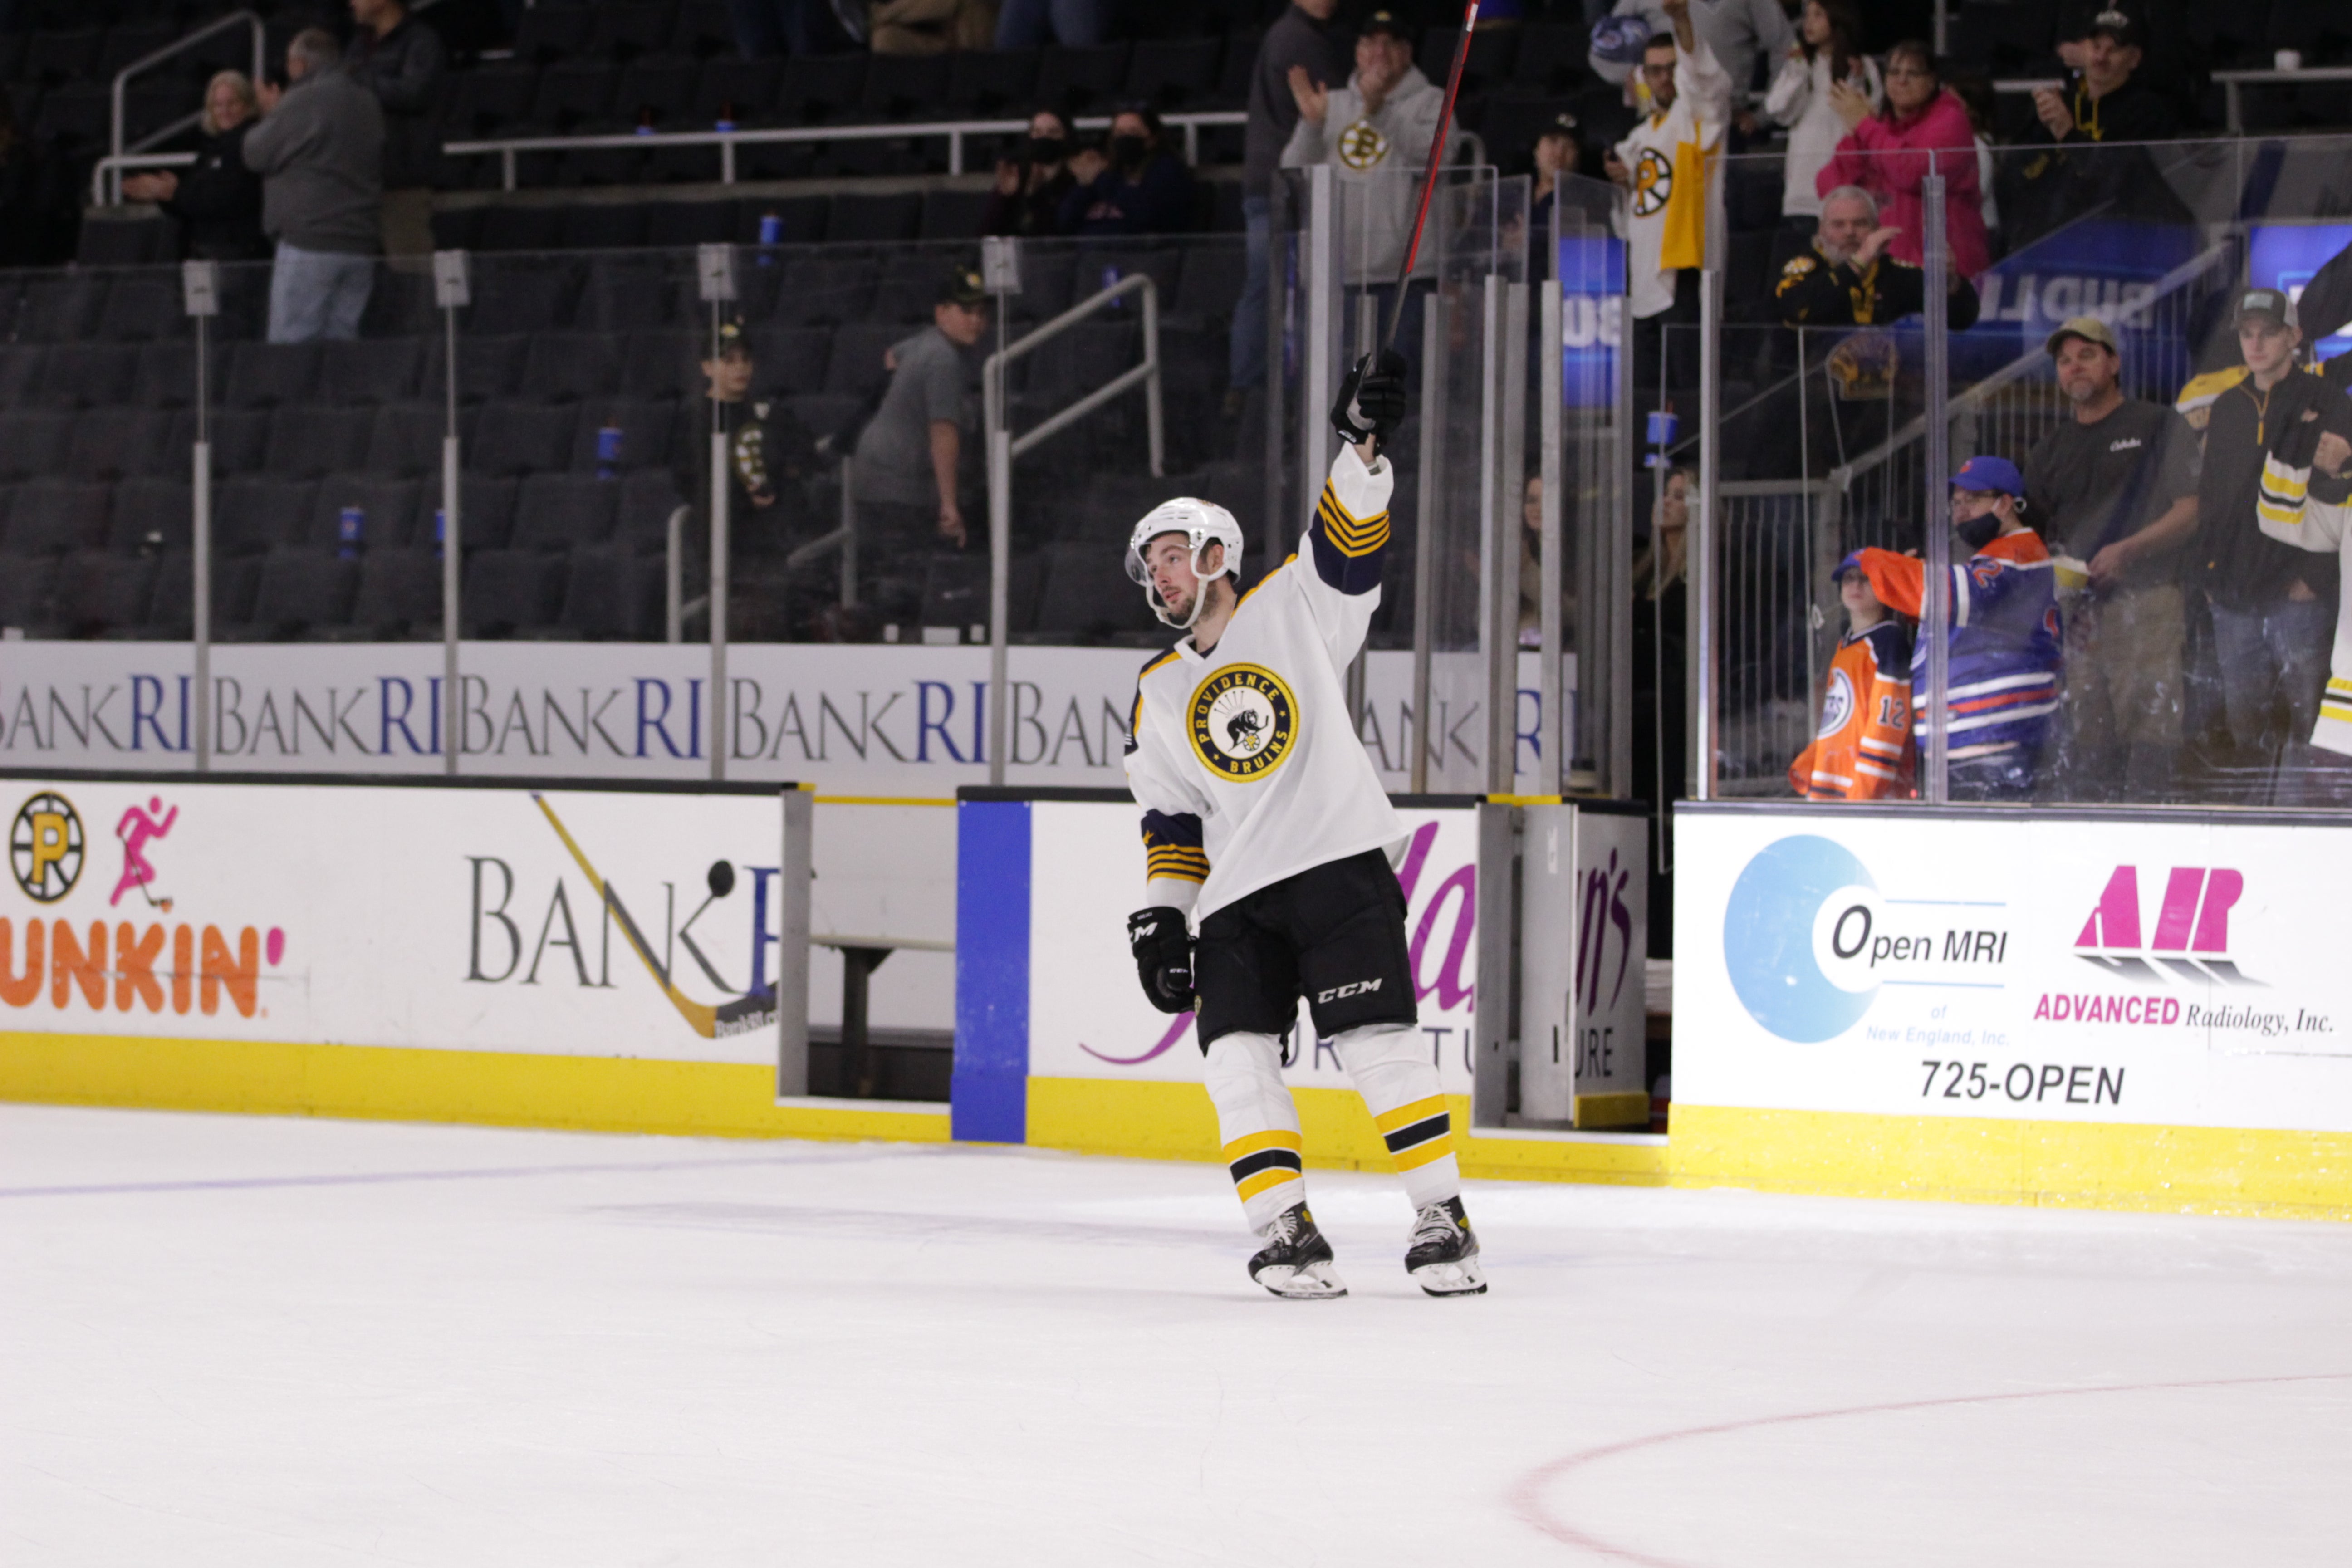 PROVIDENCE BRUINS BACK IN WIN COLUMN WITH 6-3 WIN OVER LEHIGH VALLEY PHANTOMS